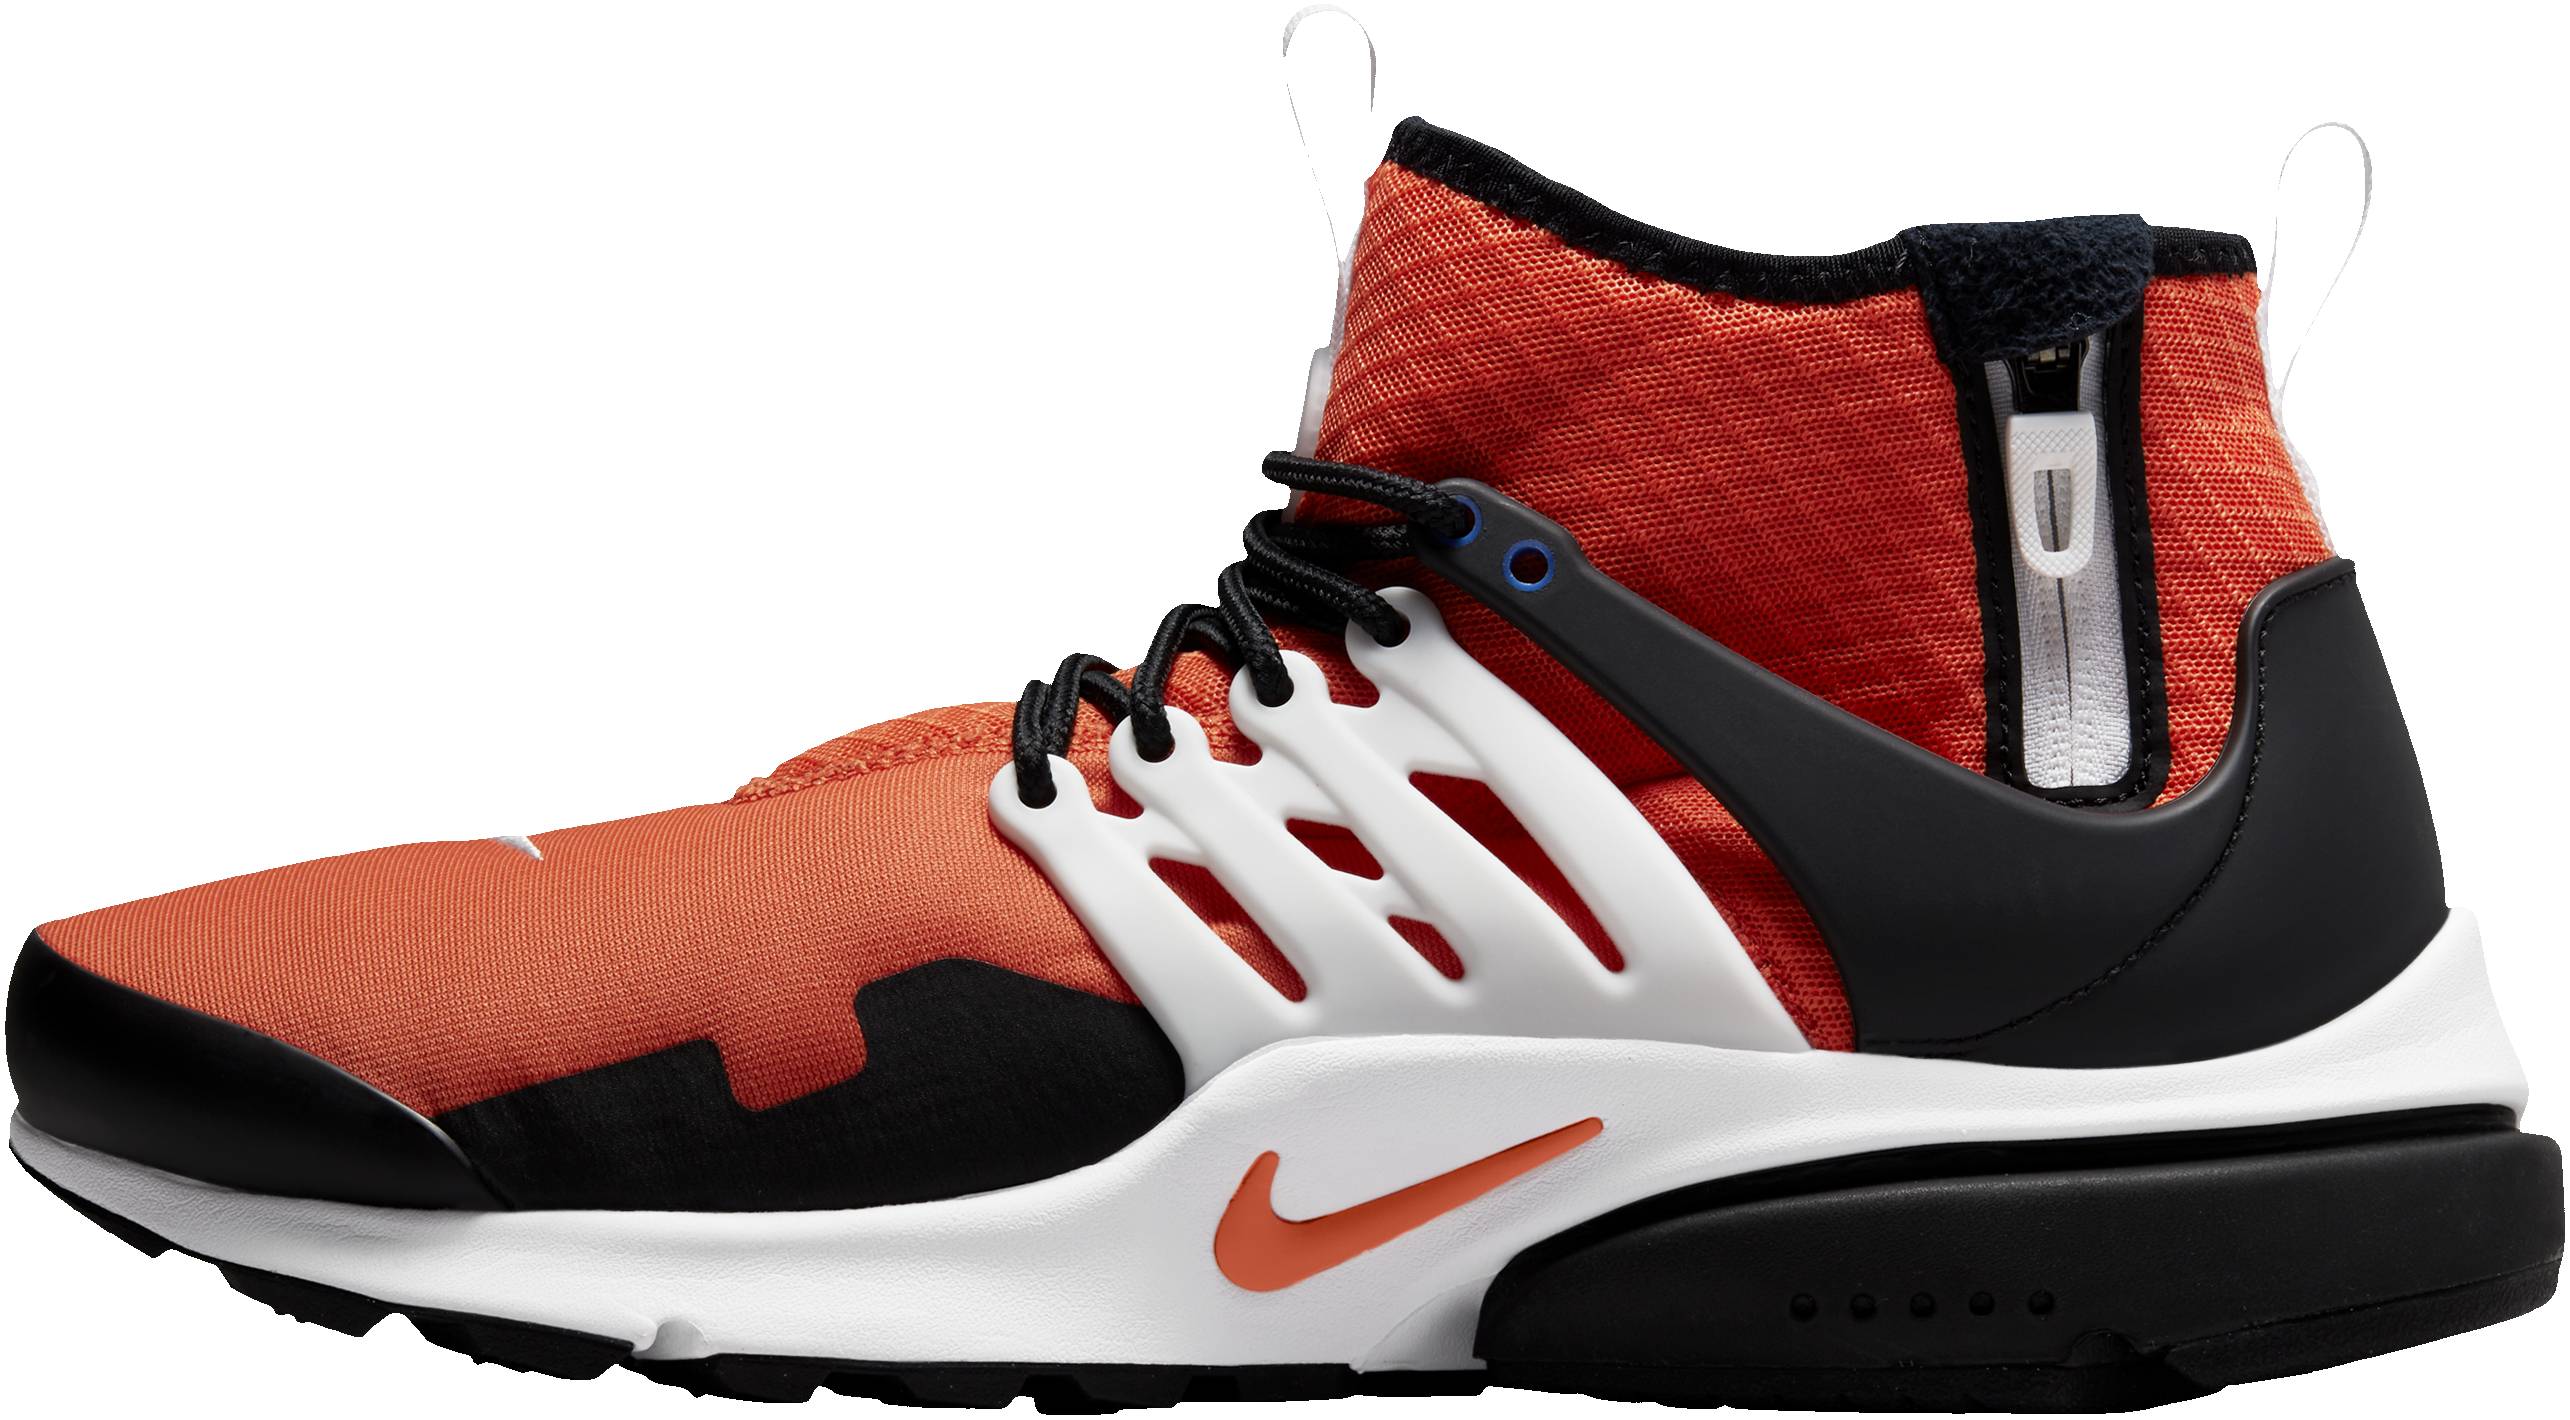 Comparison, nike mowabb red black hair color shades, Nike Air Presto Mid Utility | Infrastructure-intelligenceShops, Facts